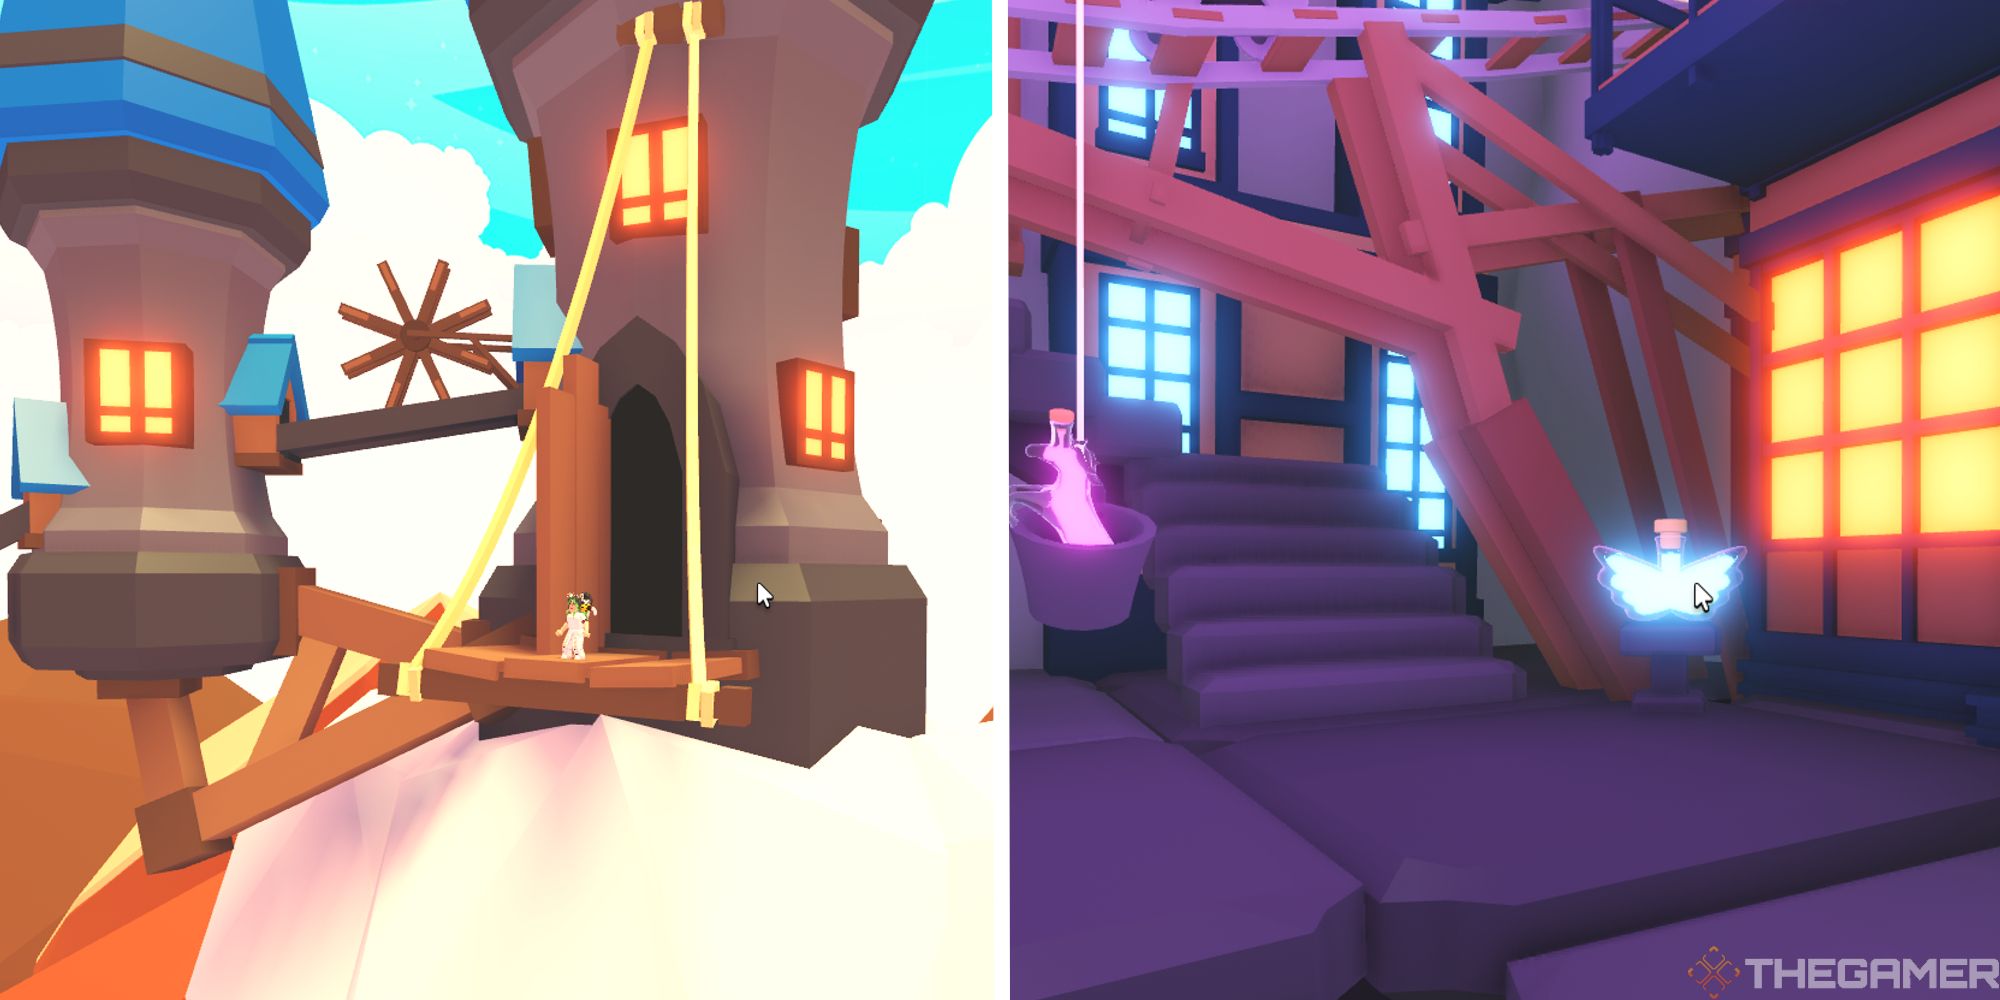 image of sky castle next to image of fly potion inside